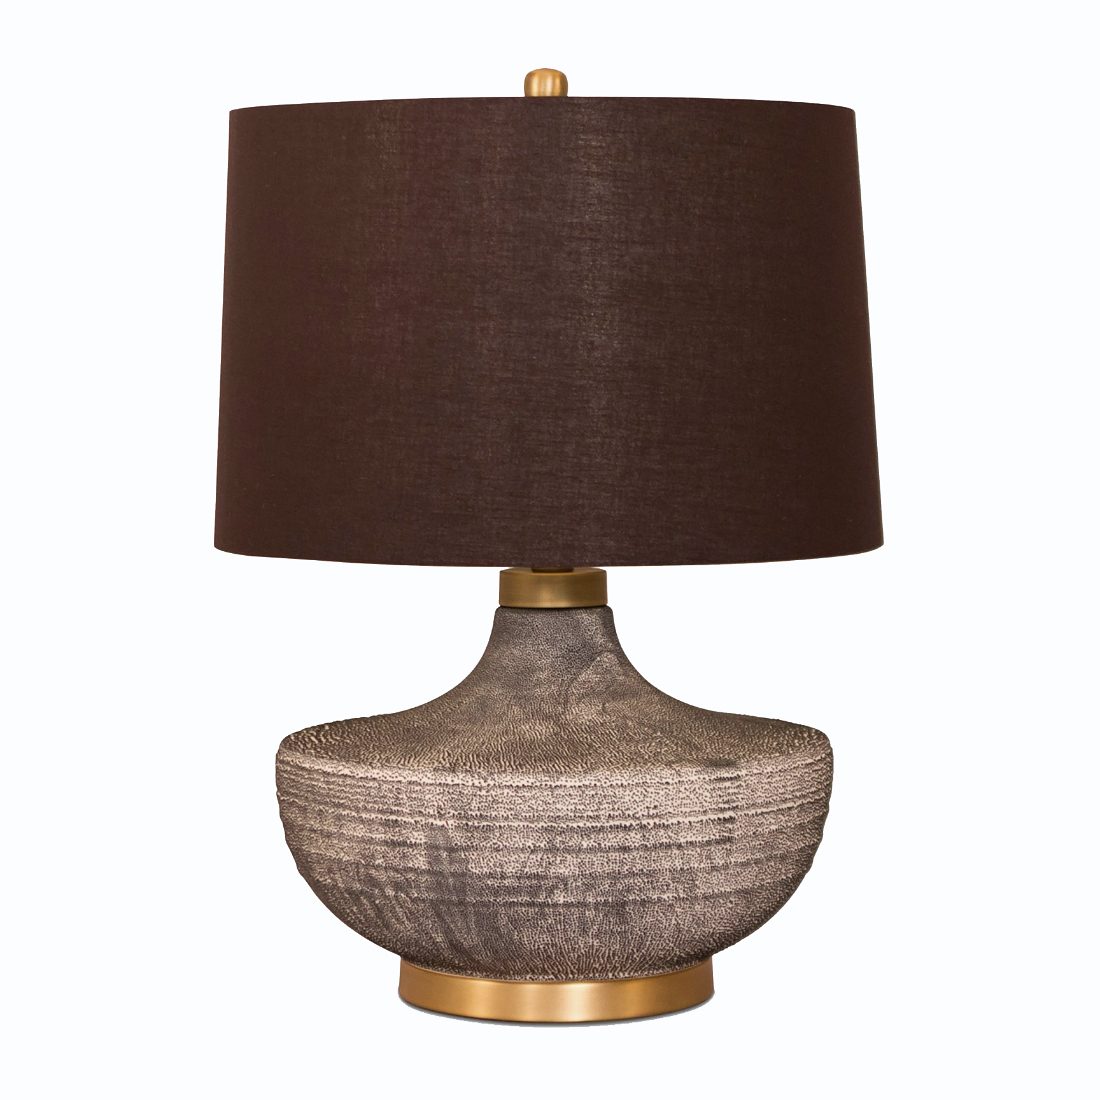 Textured Ceramic Table Lamp With Black, Round Table Lamps Uk